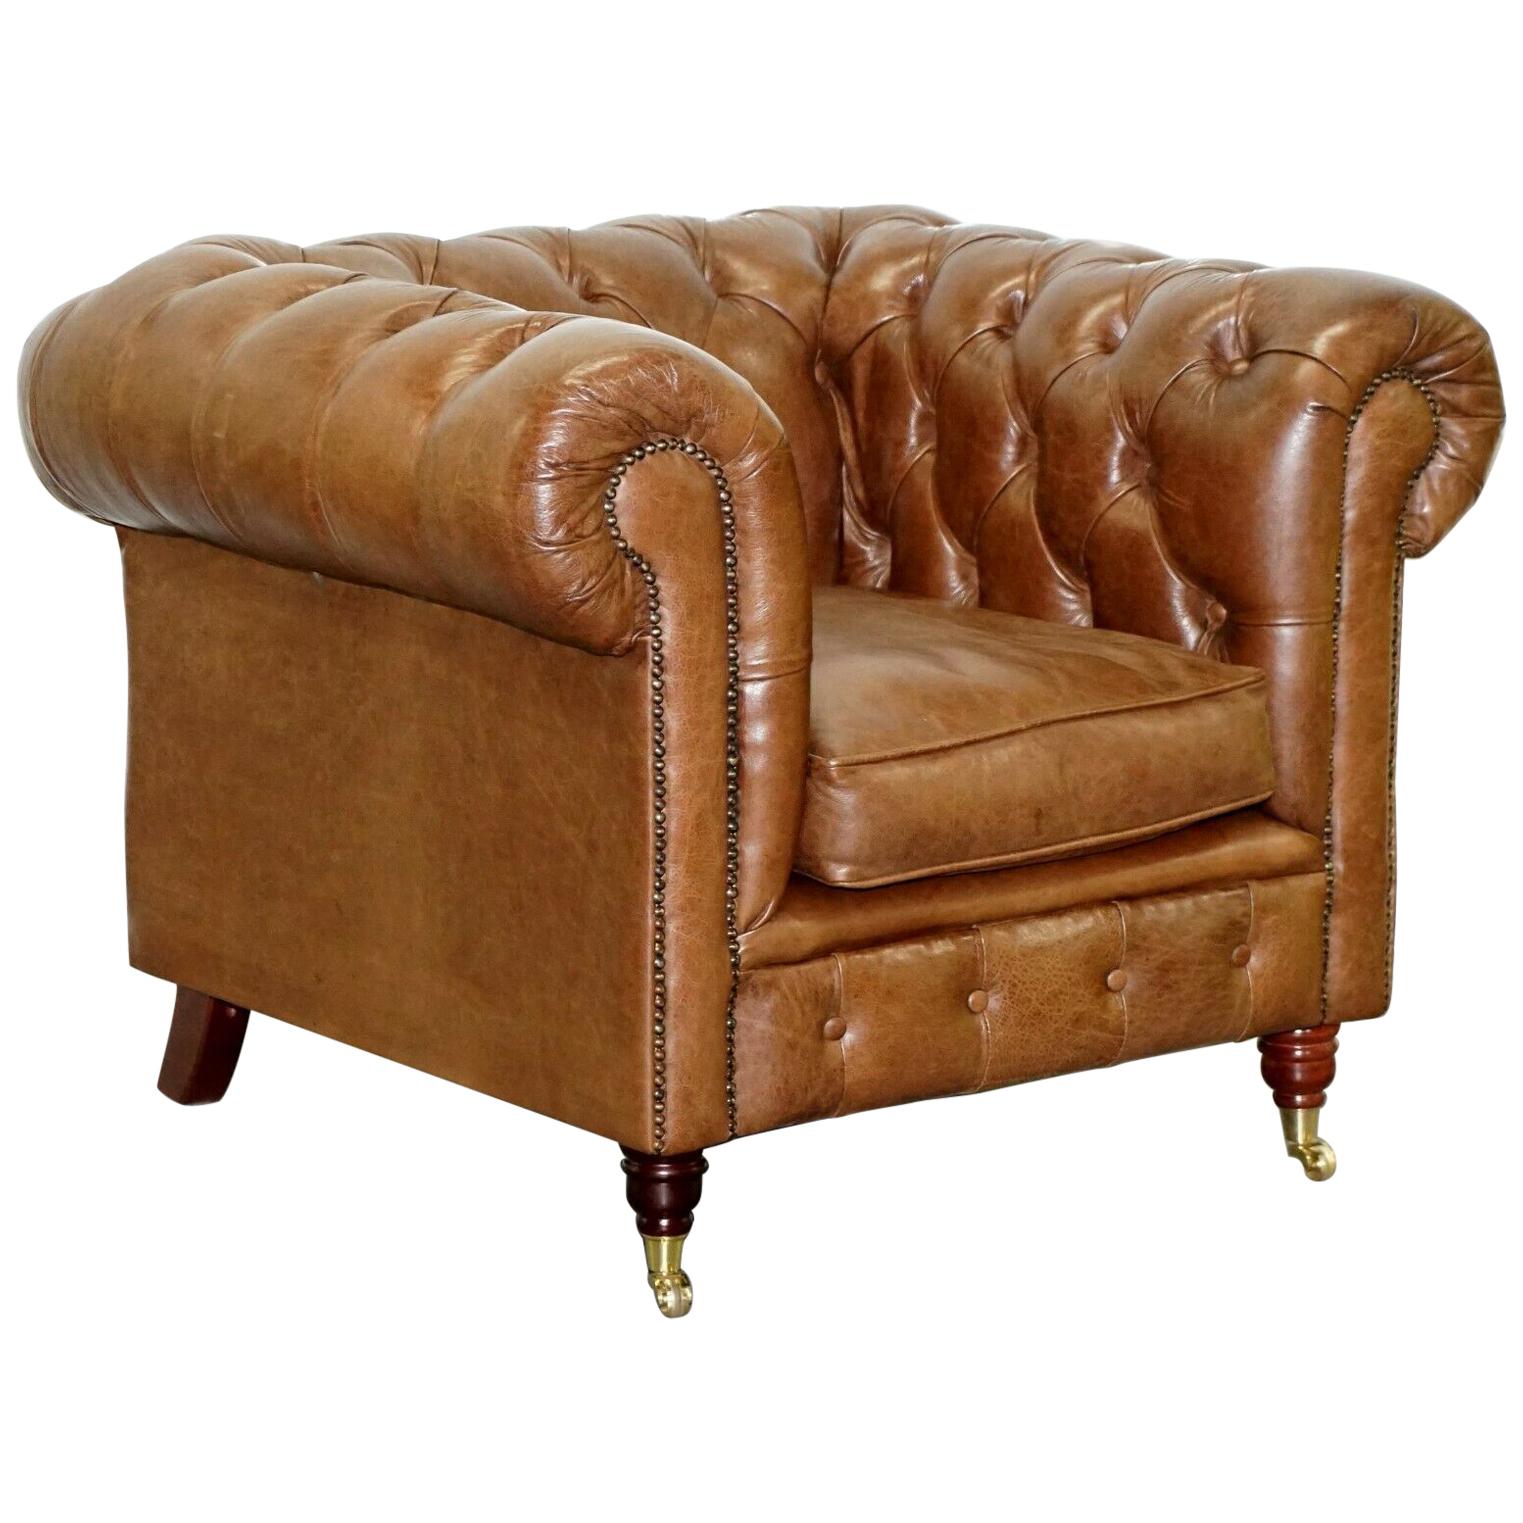 Chesterfield Tufted Heritage Brown Leather Armchair Part of a Large Suite Sofas